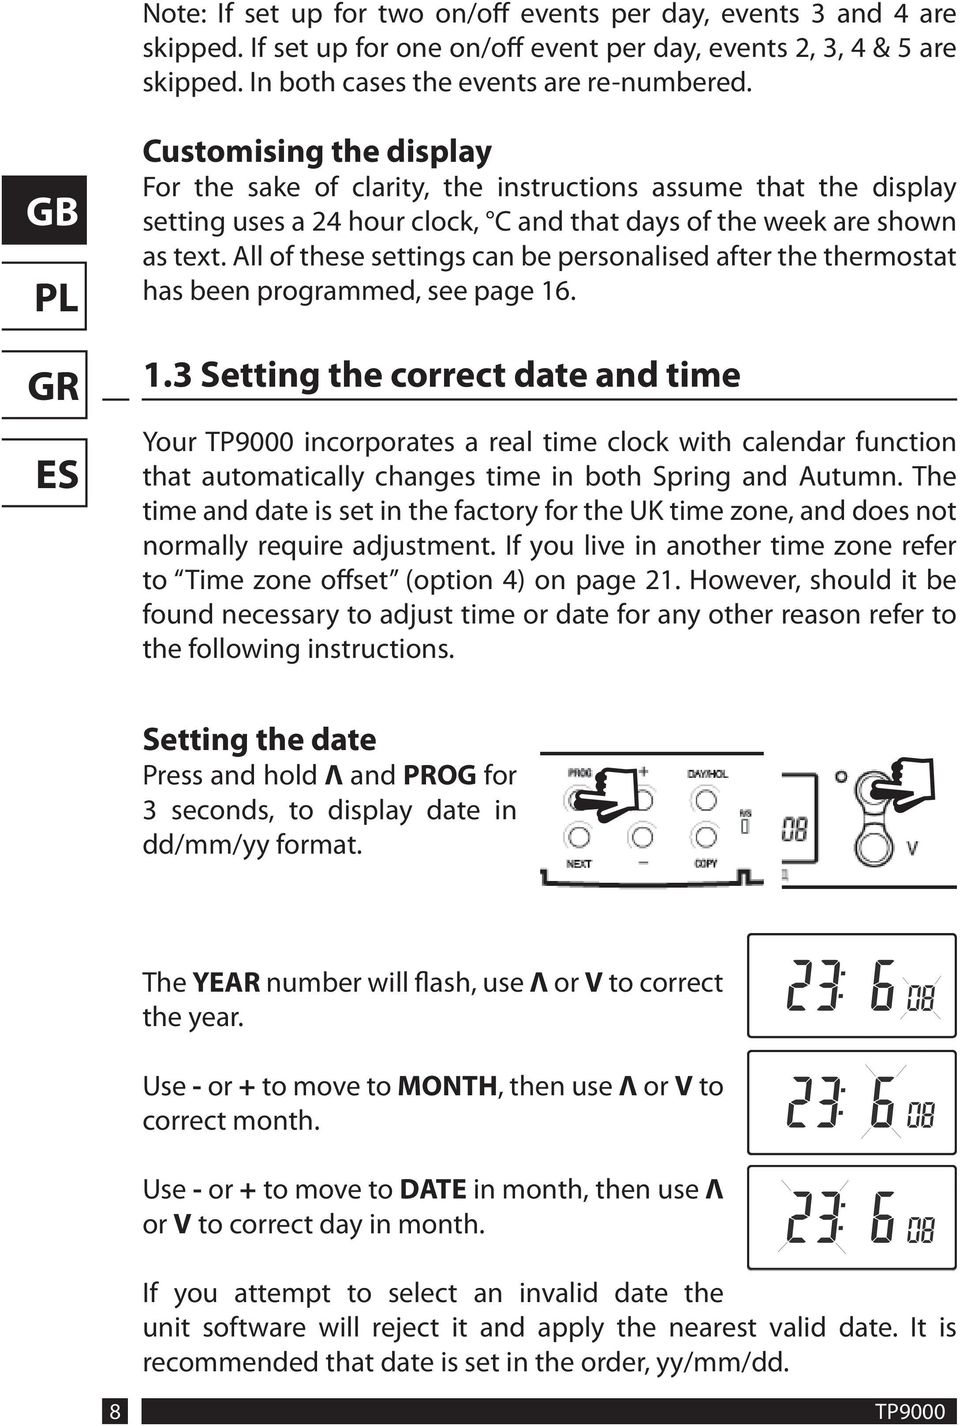 All of these settings can be personalised after the thermostat has been programmed, see page 16